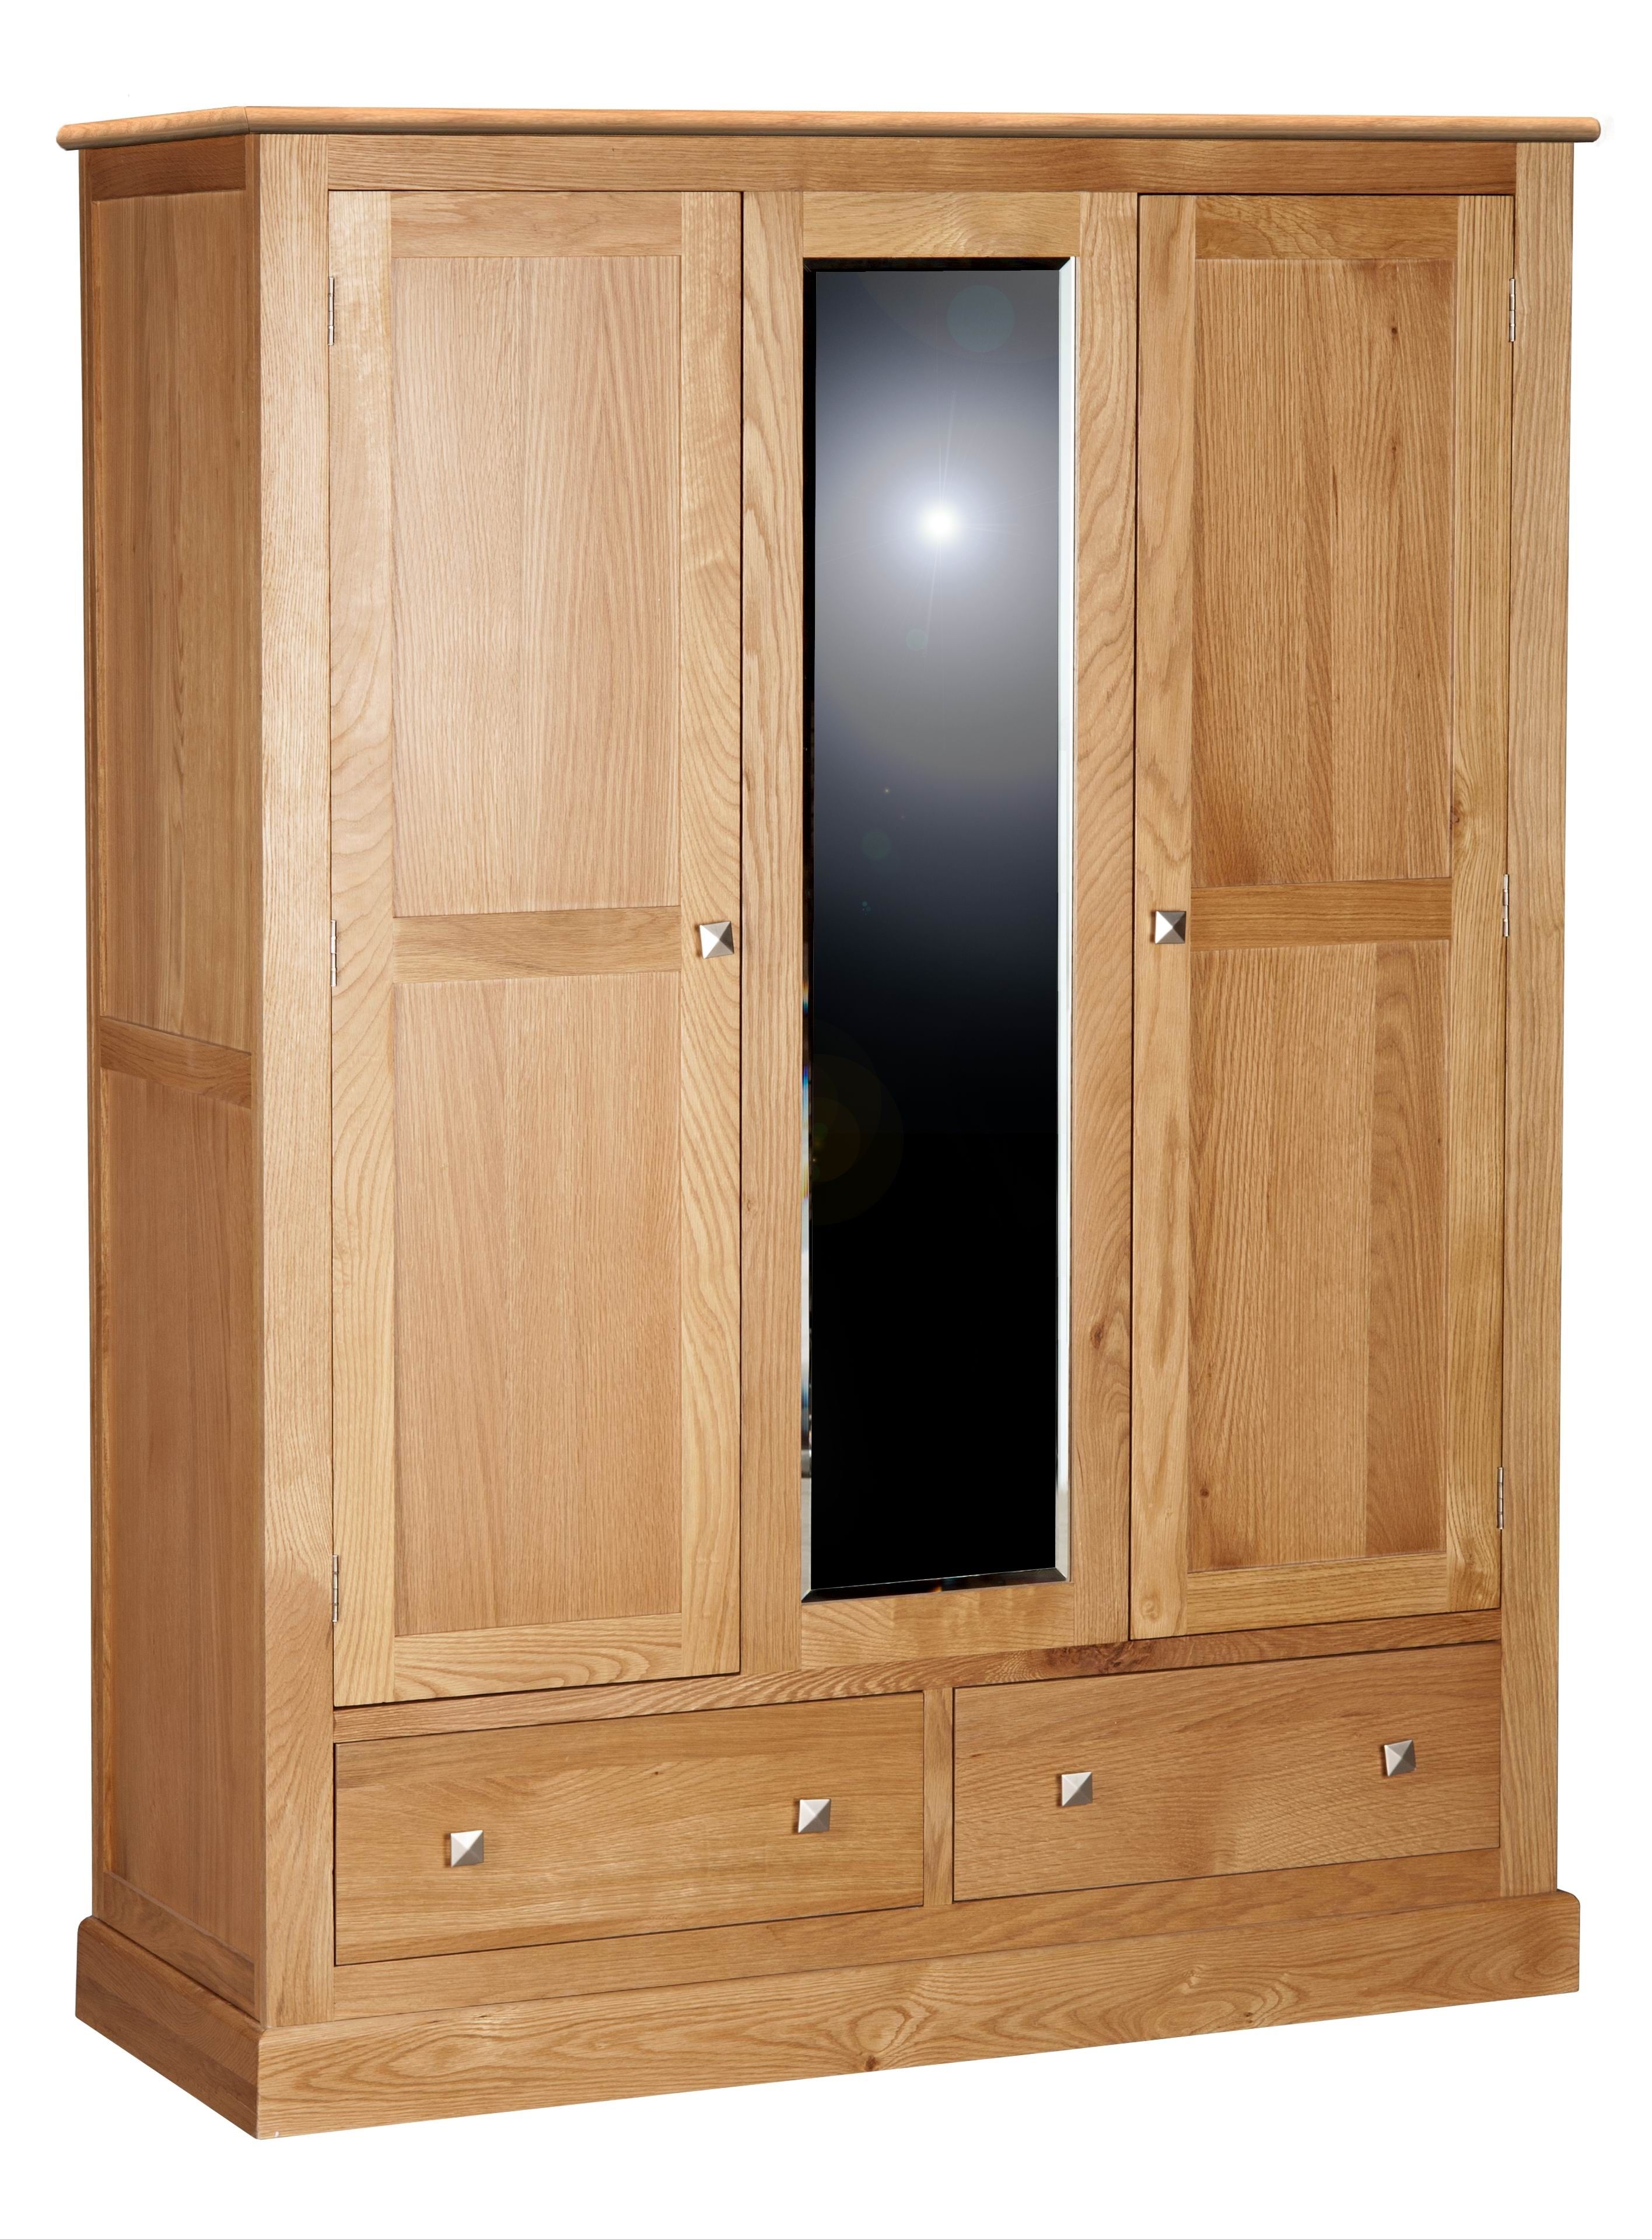 Aspen Oak Triple Wardrobe With Mirrored Center Door Hanging Rail For Wardrobe Double Hanging Rail (View 13 of 15)